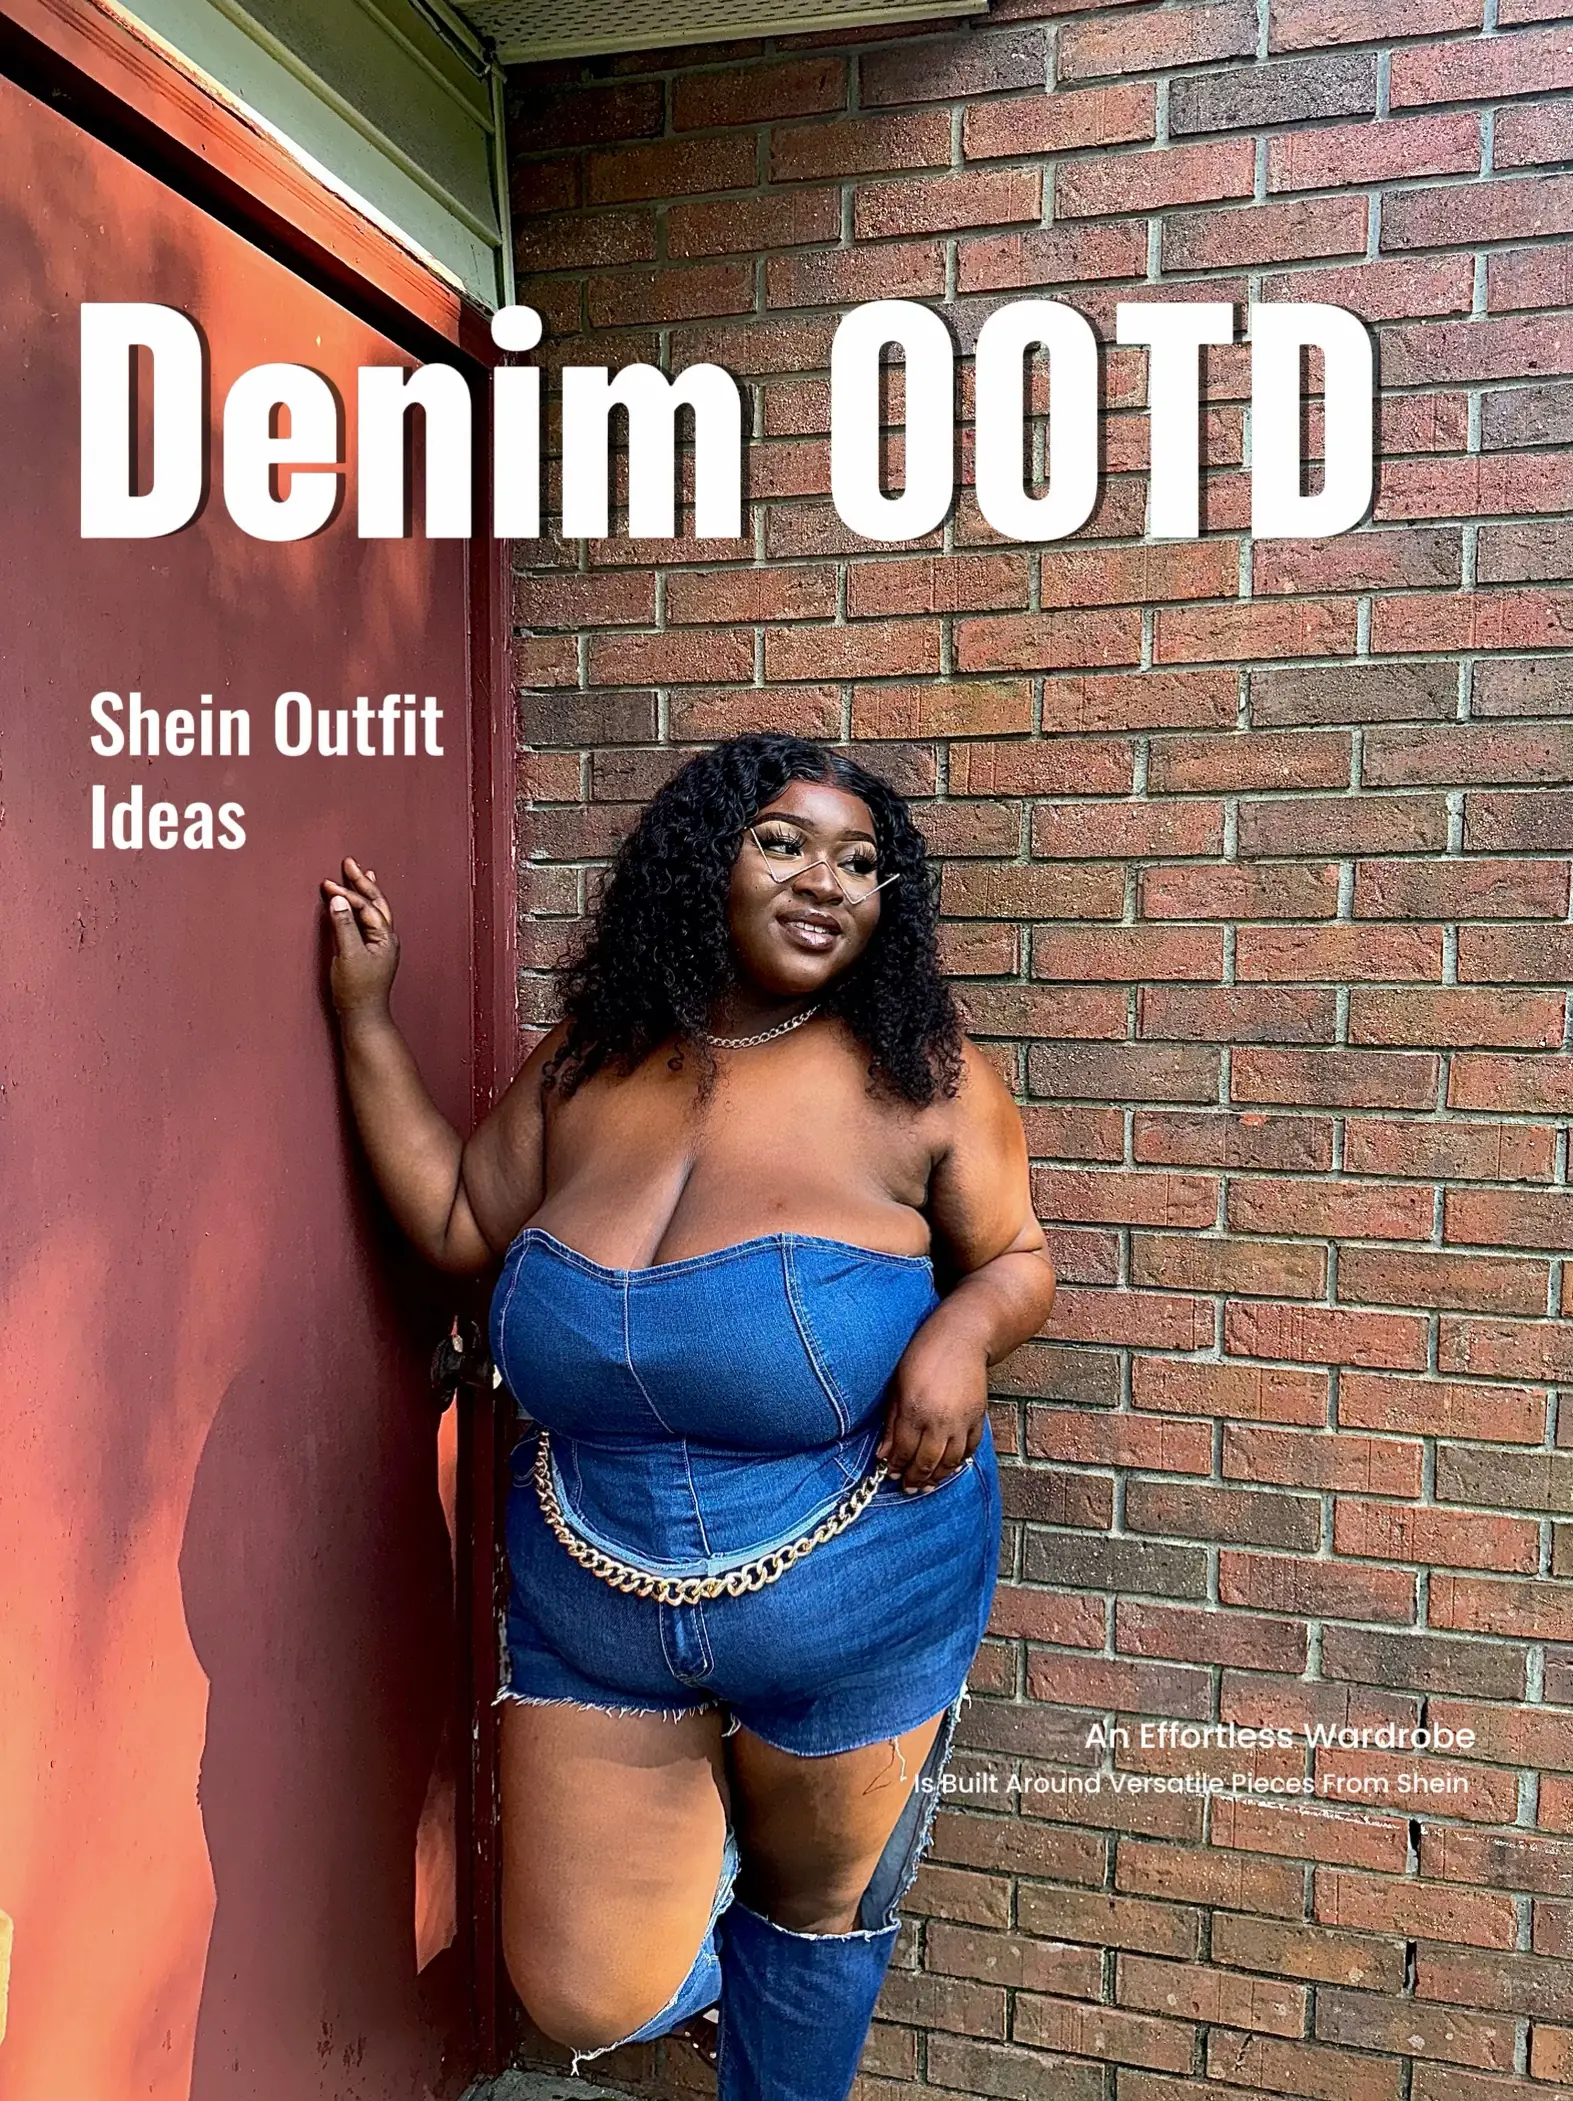 SHEIN CURVE - What the dress in our dreams looks like 💙IG